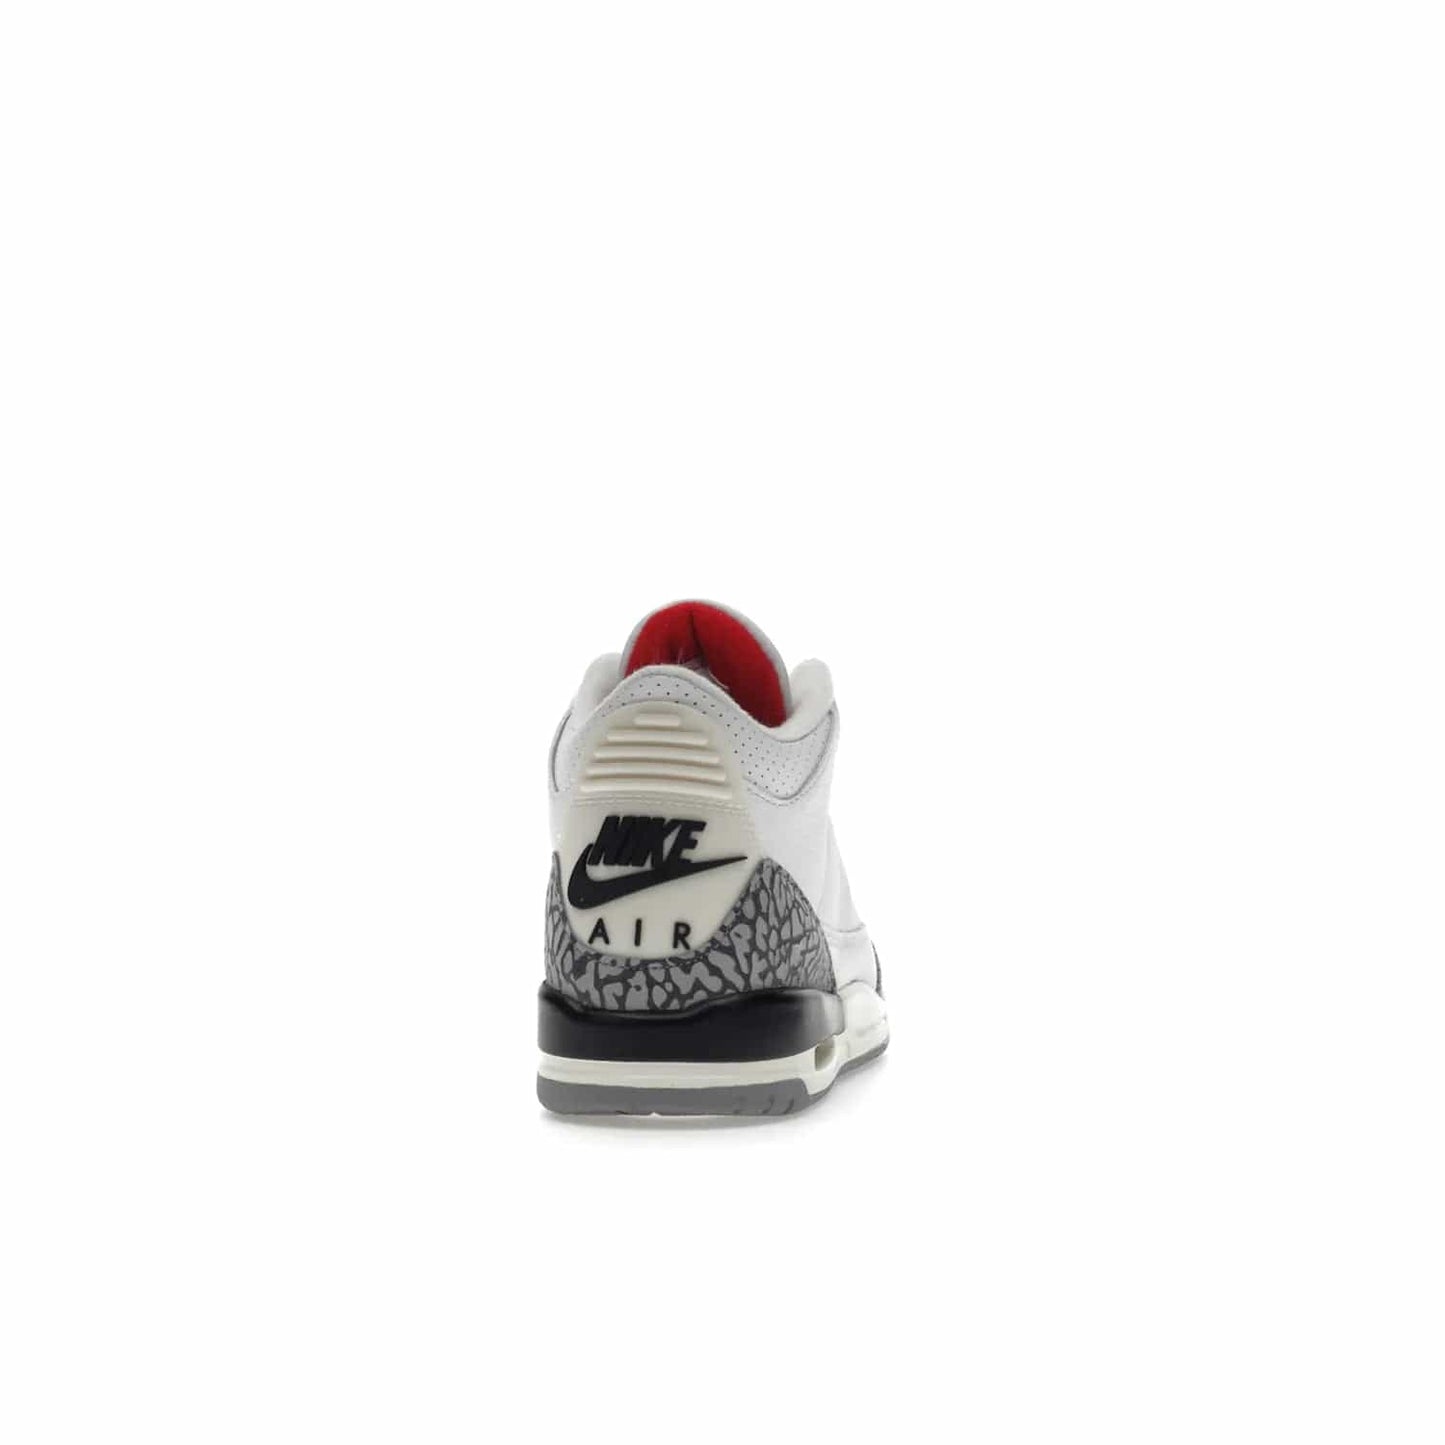 Jordan 3 Retro White Cement Reimagined (GS) - Image 29 - Only at www.BallersClubKickz.com - Grab the perfect blend of modern design and classic style with the Jordan 3 Retro White Cement Reimagined (GS). Features Summit White, Fire Red, Black, and Cement Grey colorway, iconic Jordan logo embroidered on the tongue, and “Nike Air” branding. Limited availability, get your pair before March 11th 2023.